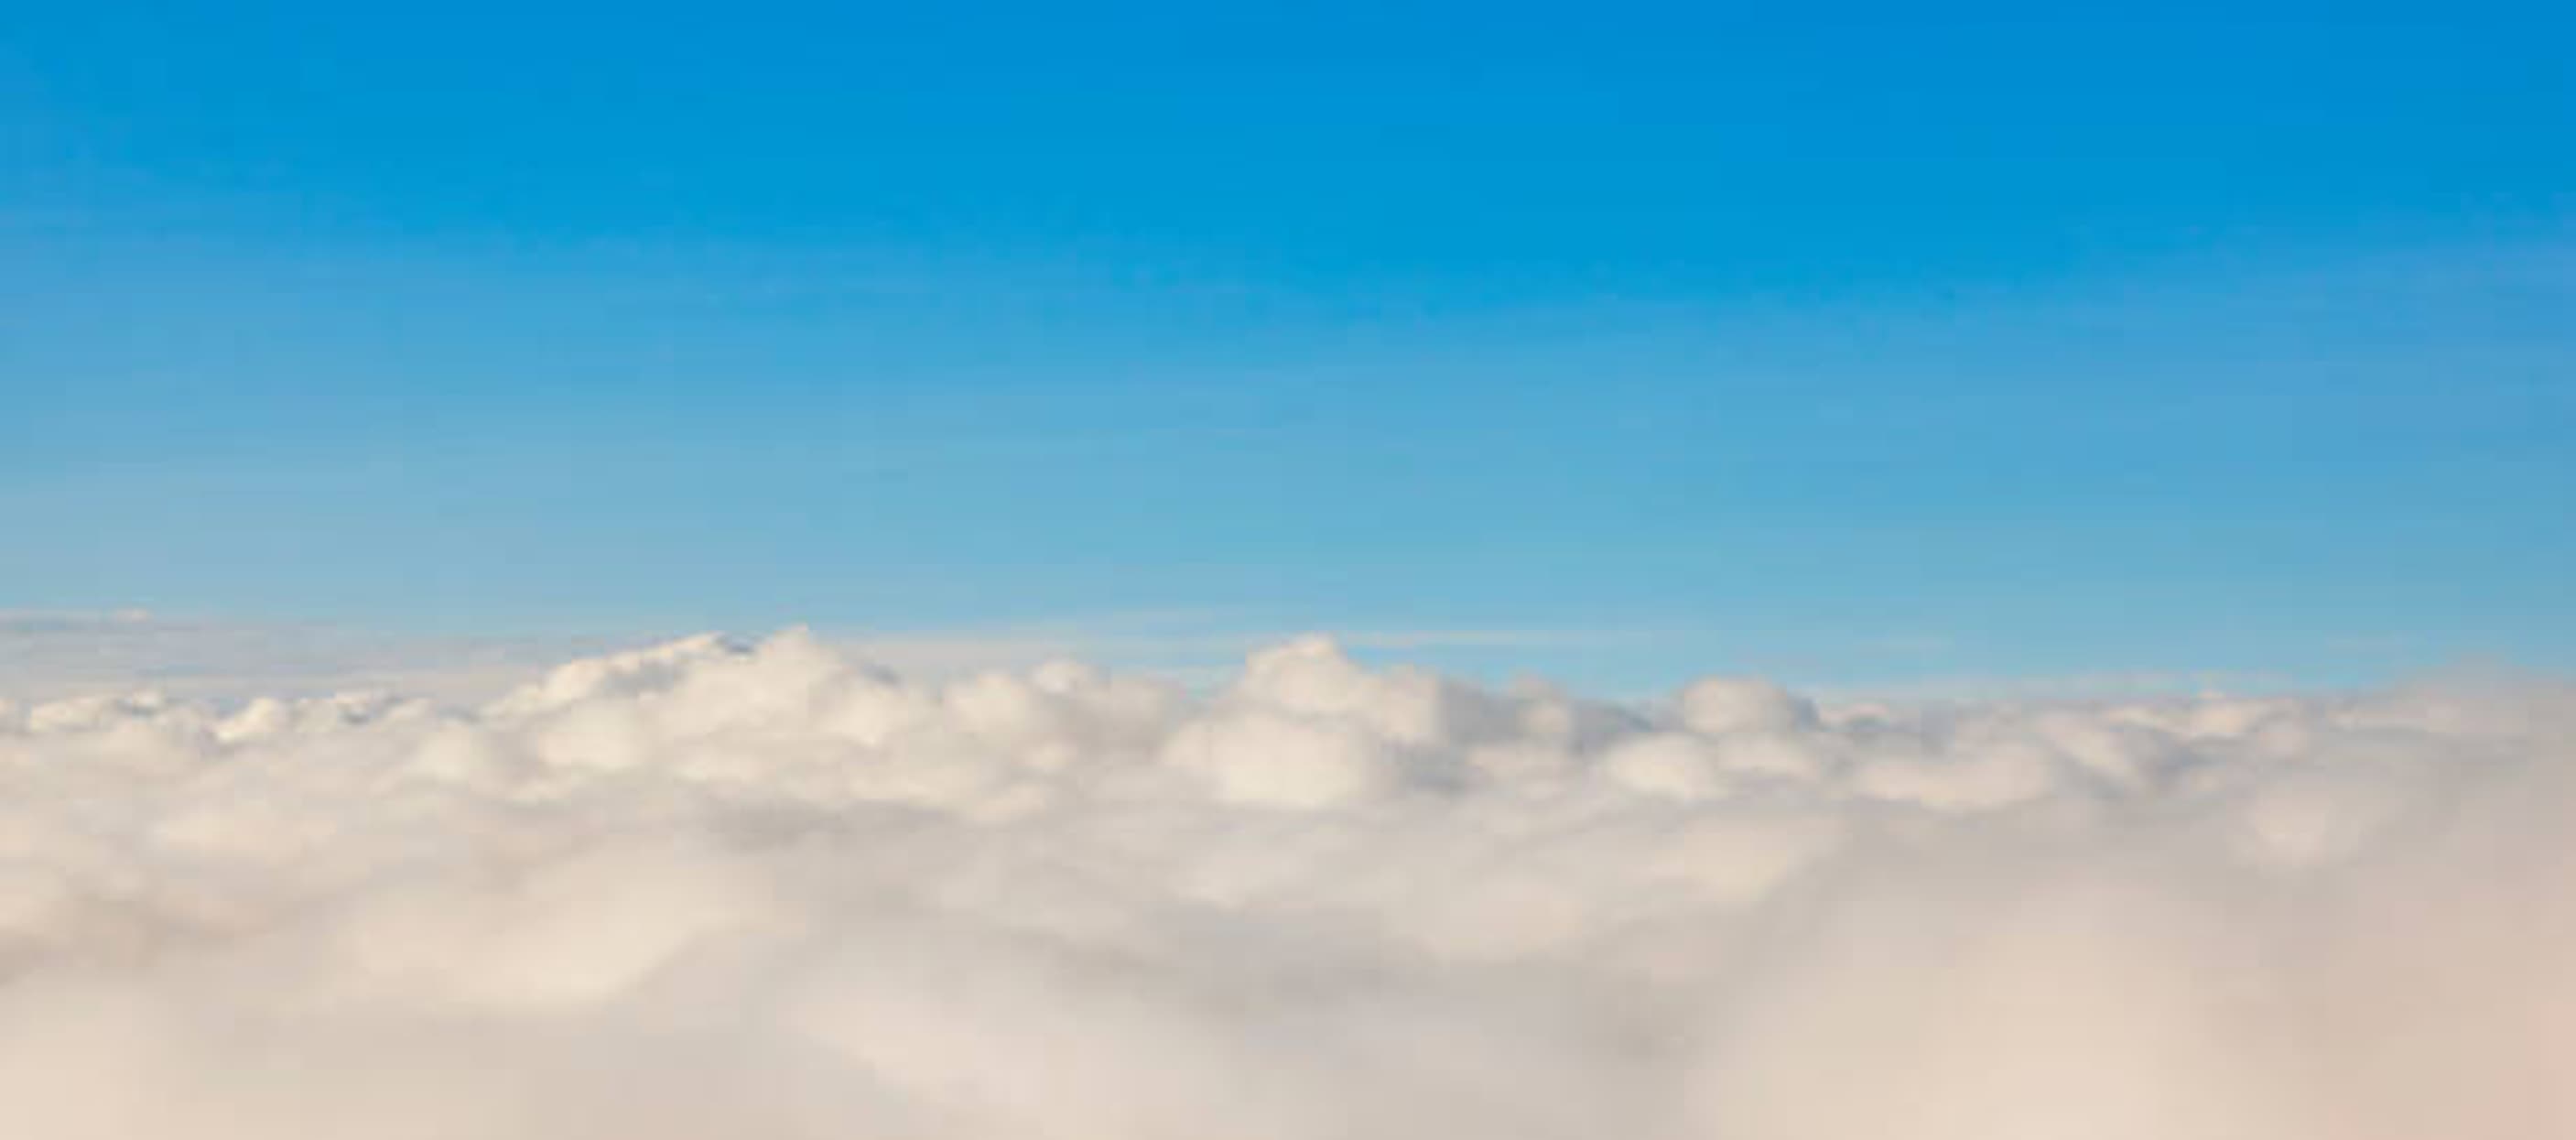 an image of the blue sky with a bird's eye view of somewhat gray cloud underneath